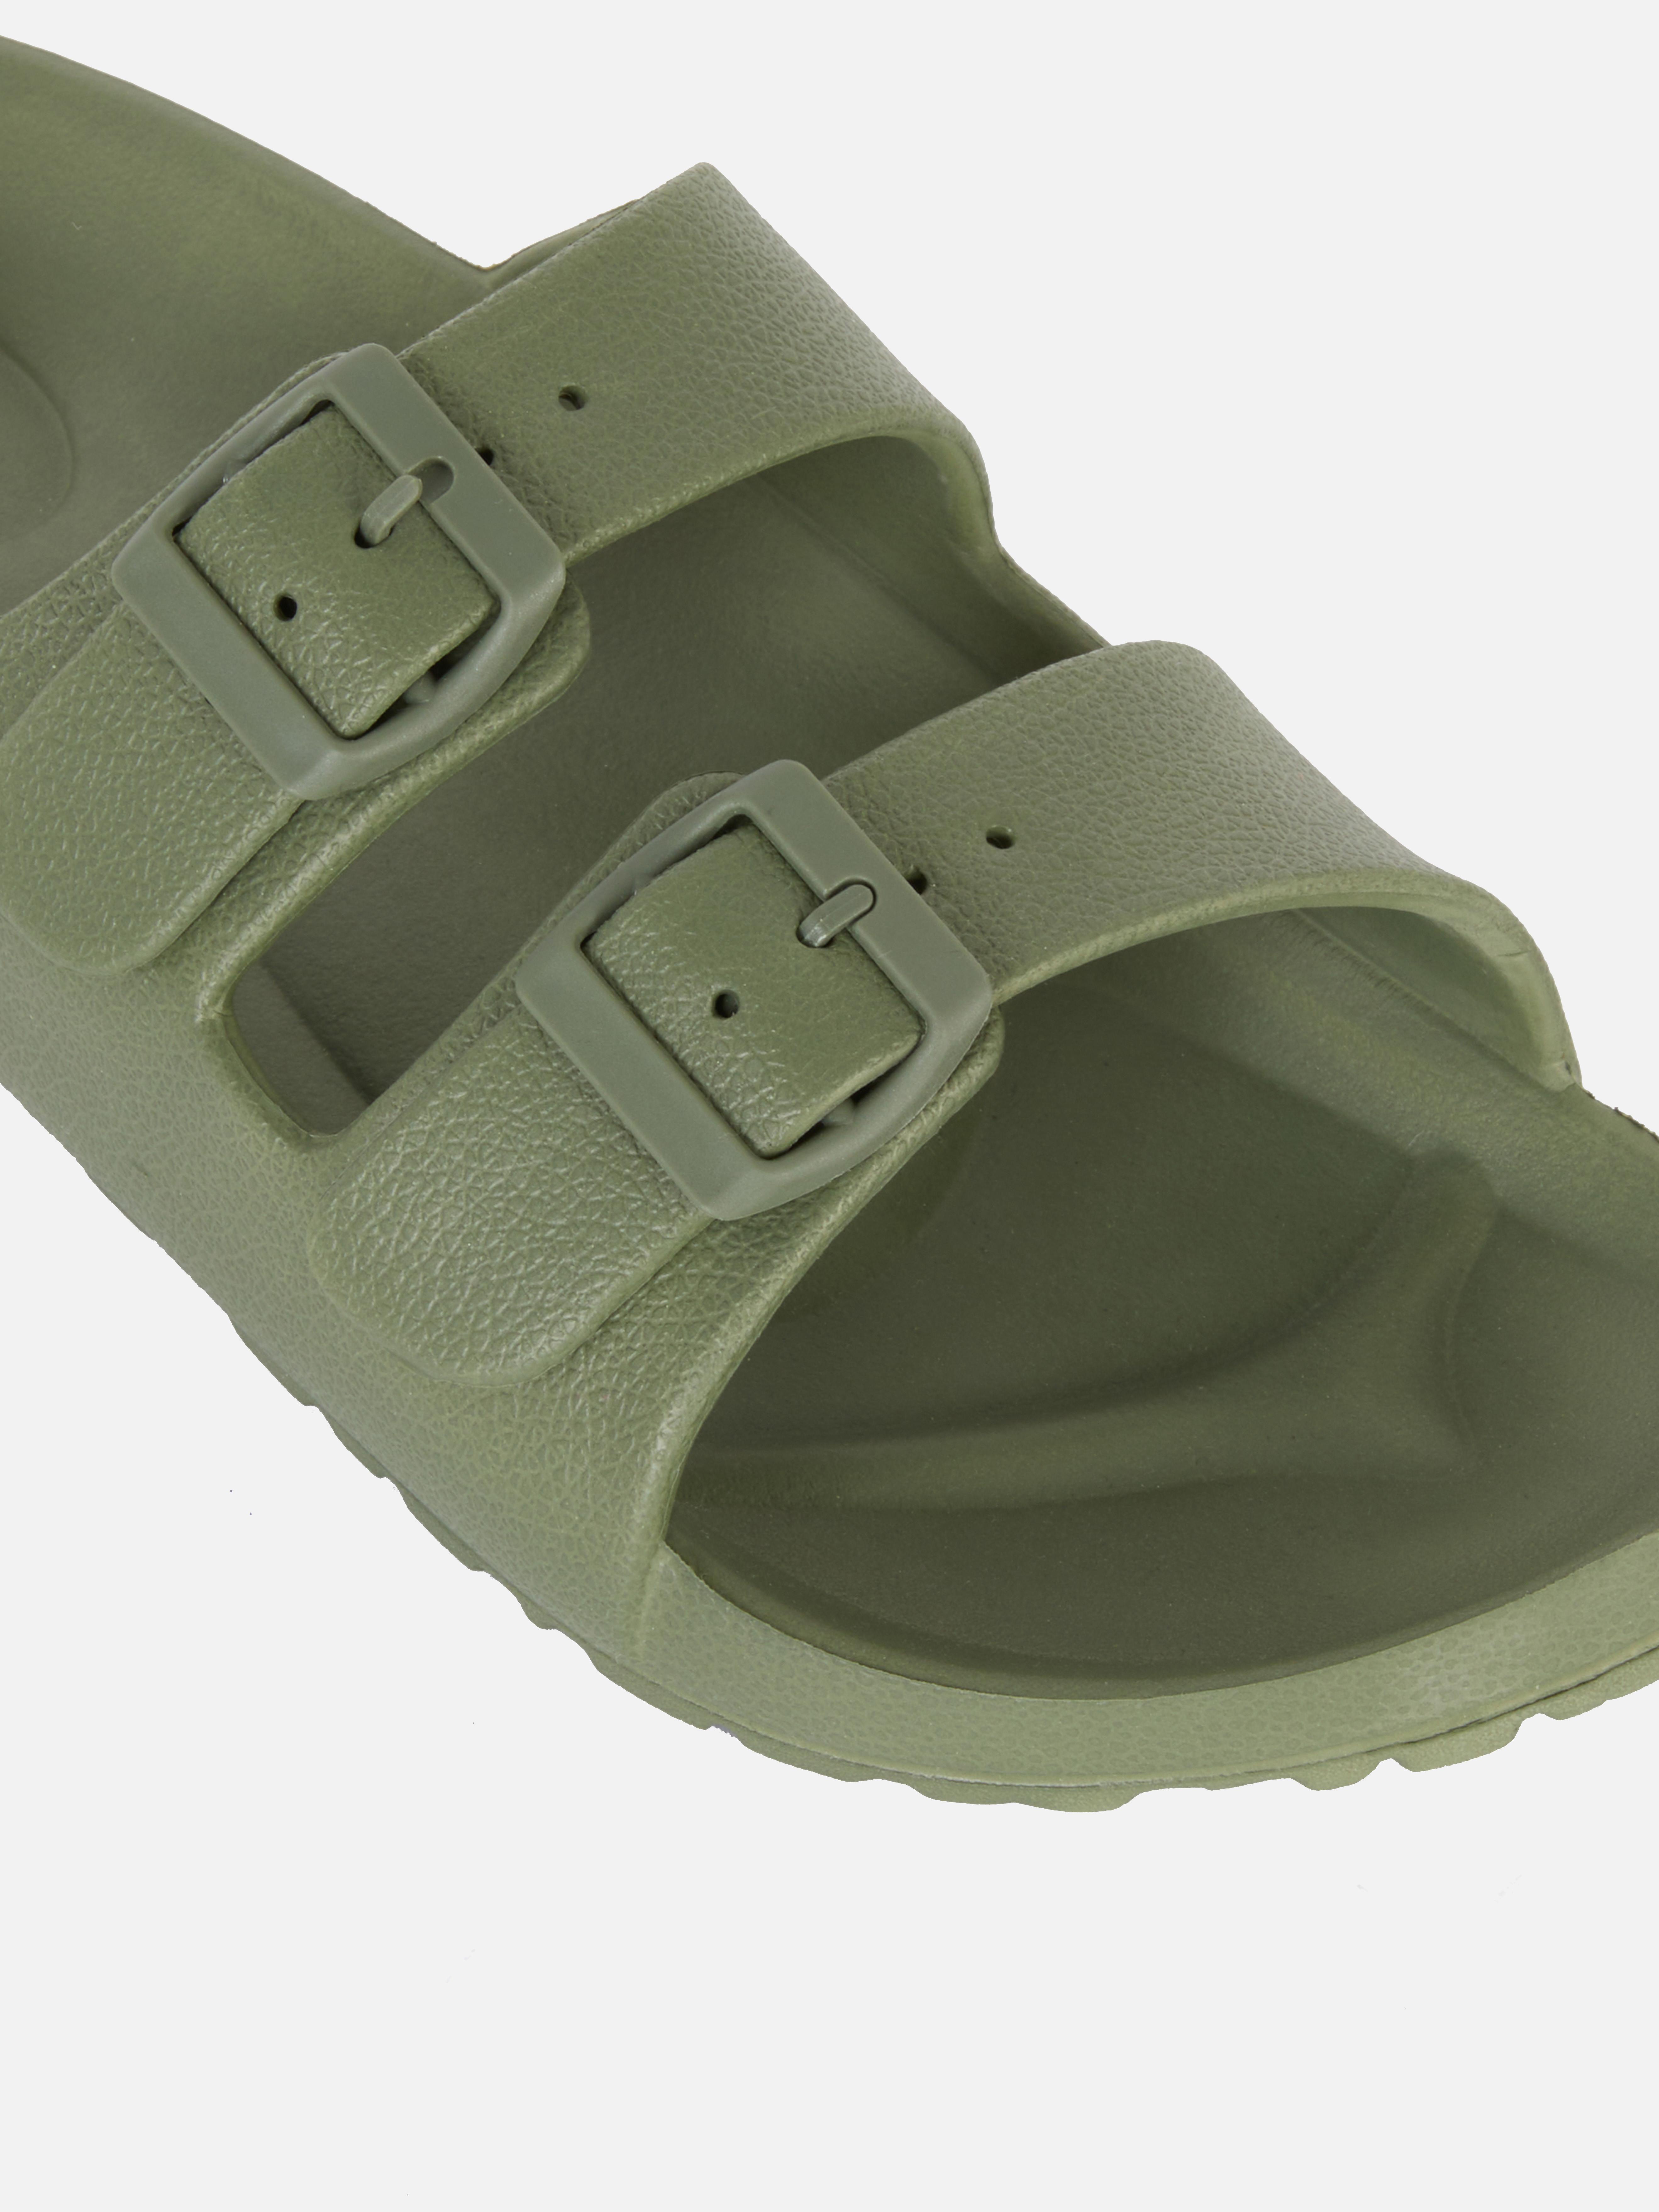 Rubber Footbed Sandals